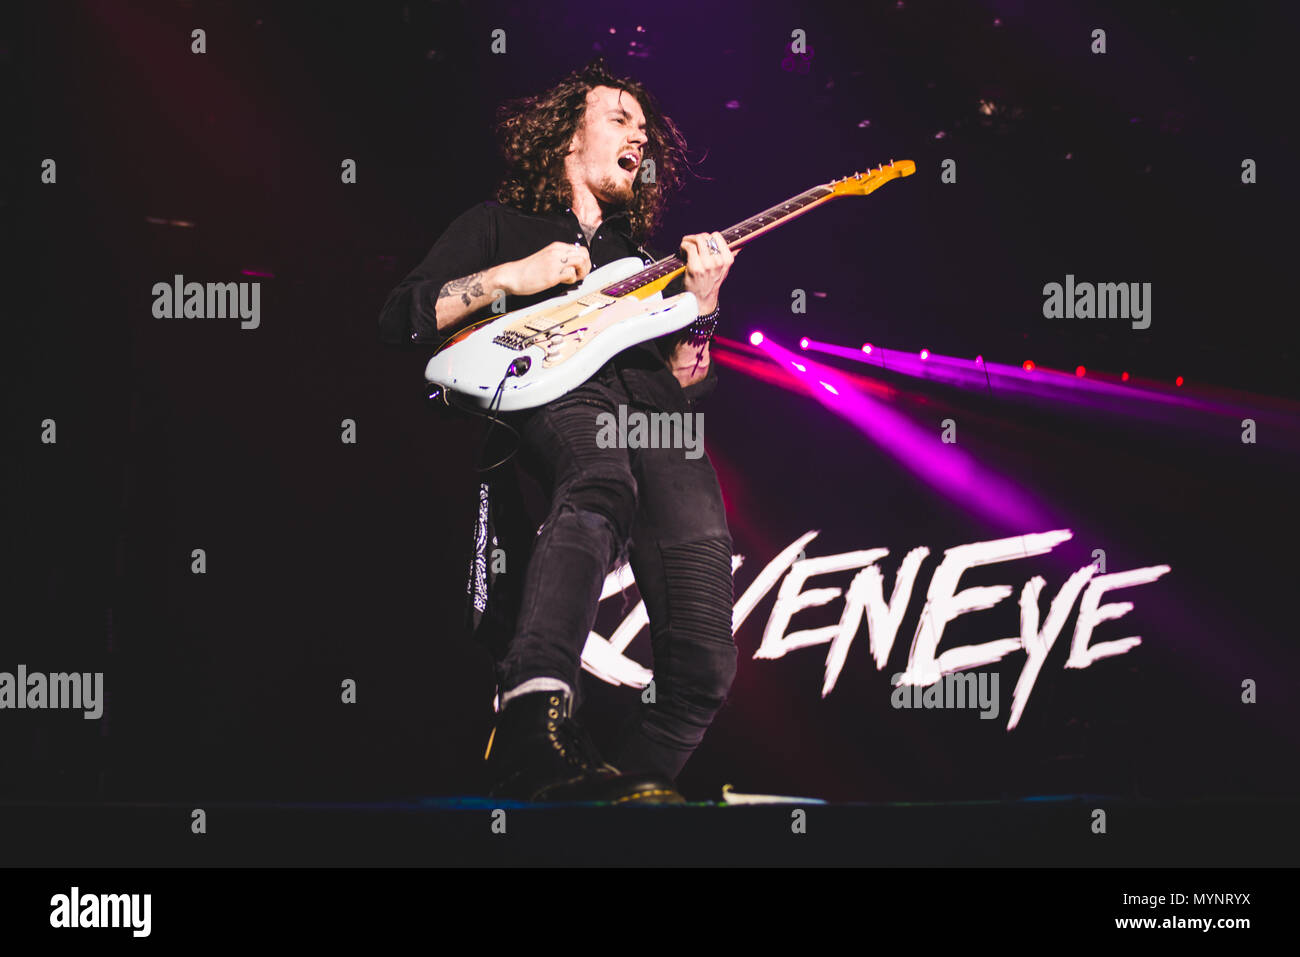 Italy: 2017 February 2nd: The English rock band Raveneye pictured performing live on stage at the Pala Alpitour, opening for the Kiss' World Tour 2017 Stock Photo